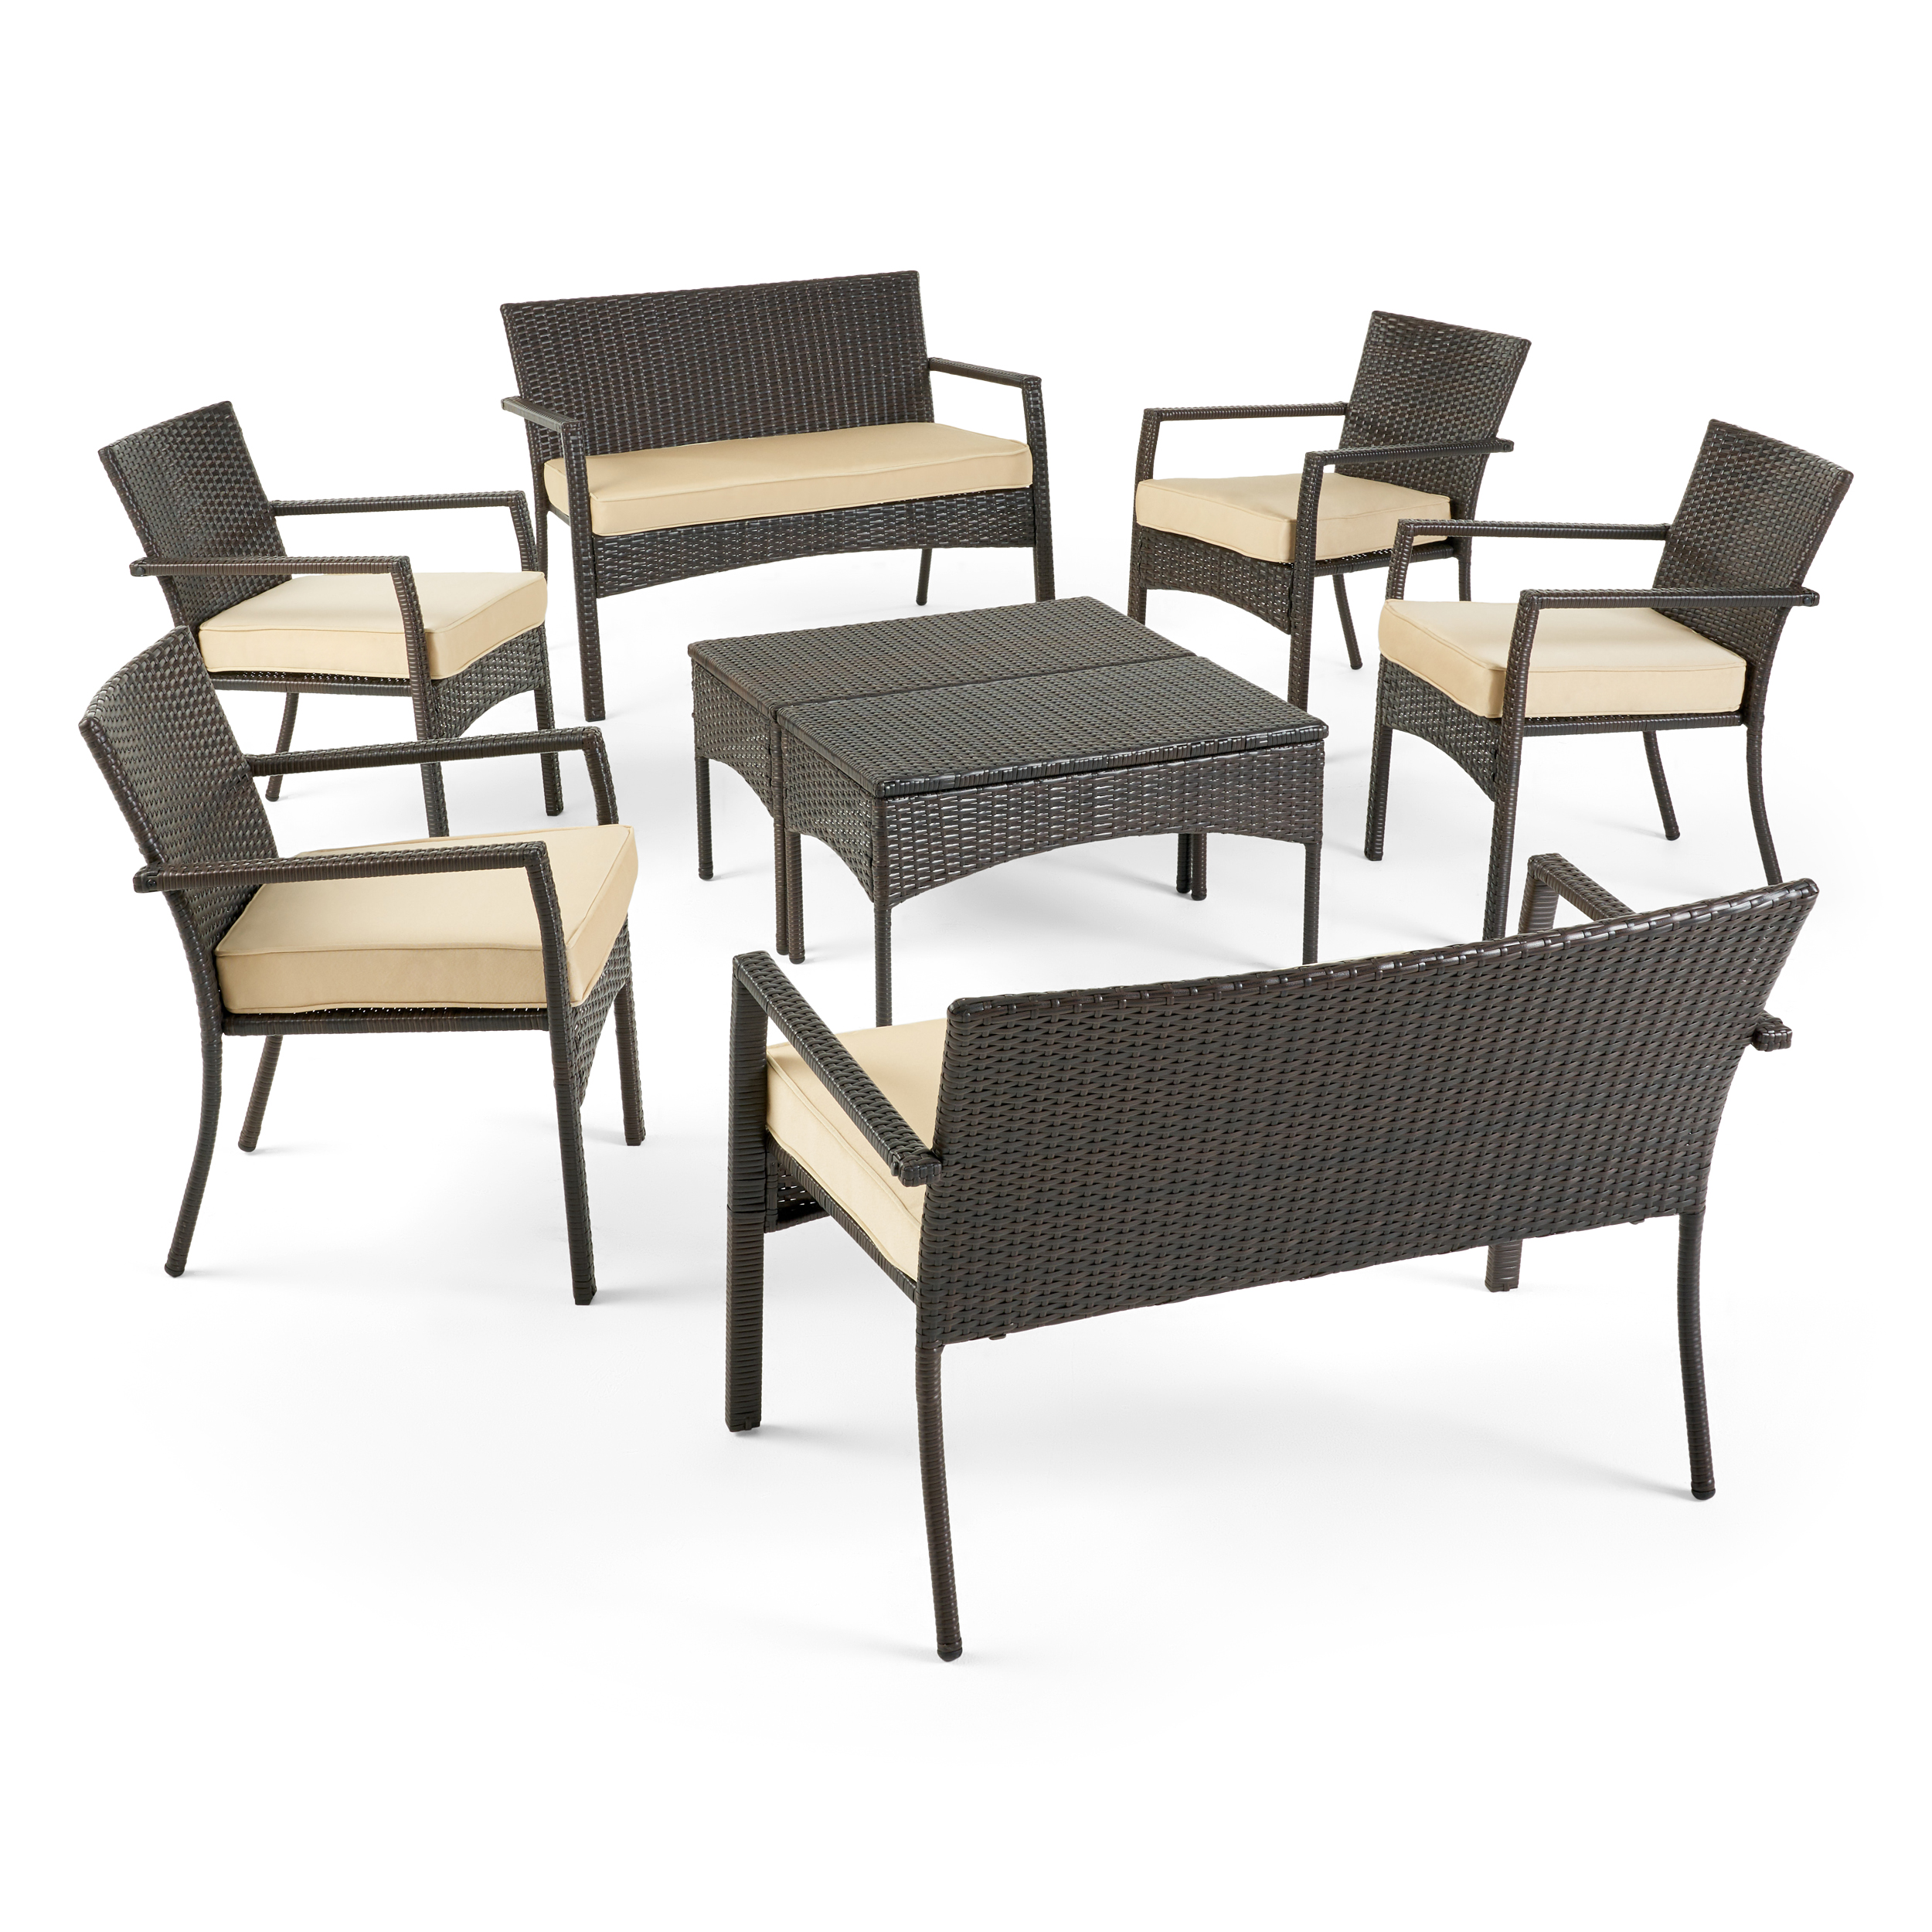 Fijian Outdoor 8 Seater Wicker Chat Set with Cushions, Multibrown and Dark Cream - image 1 of 10